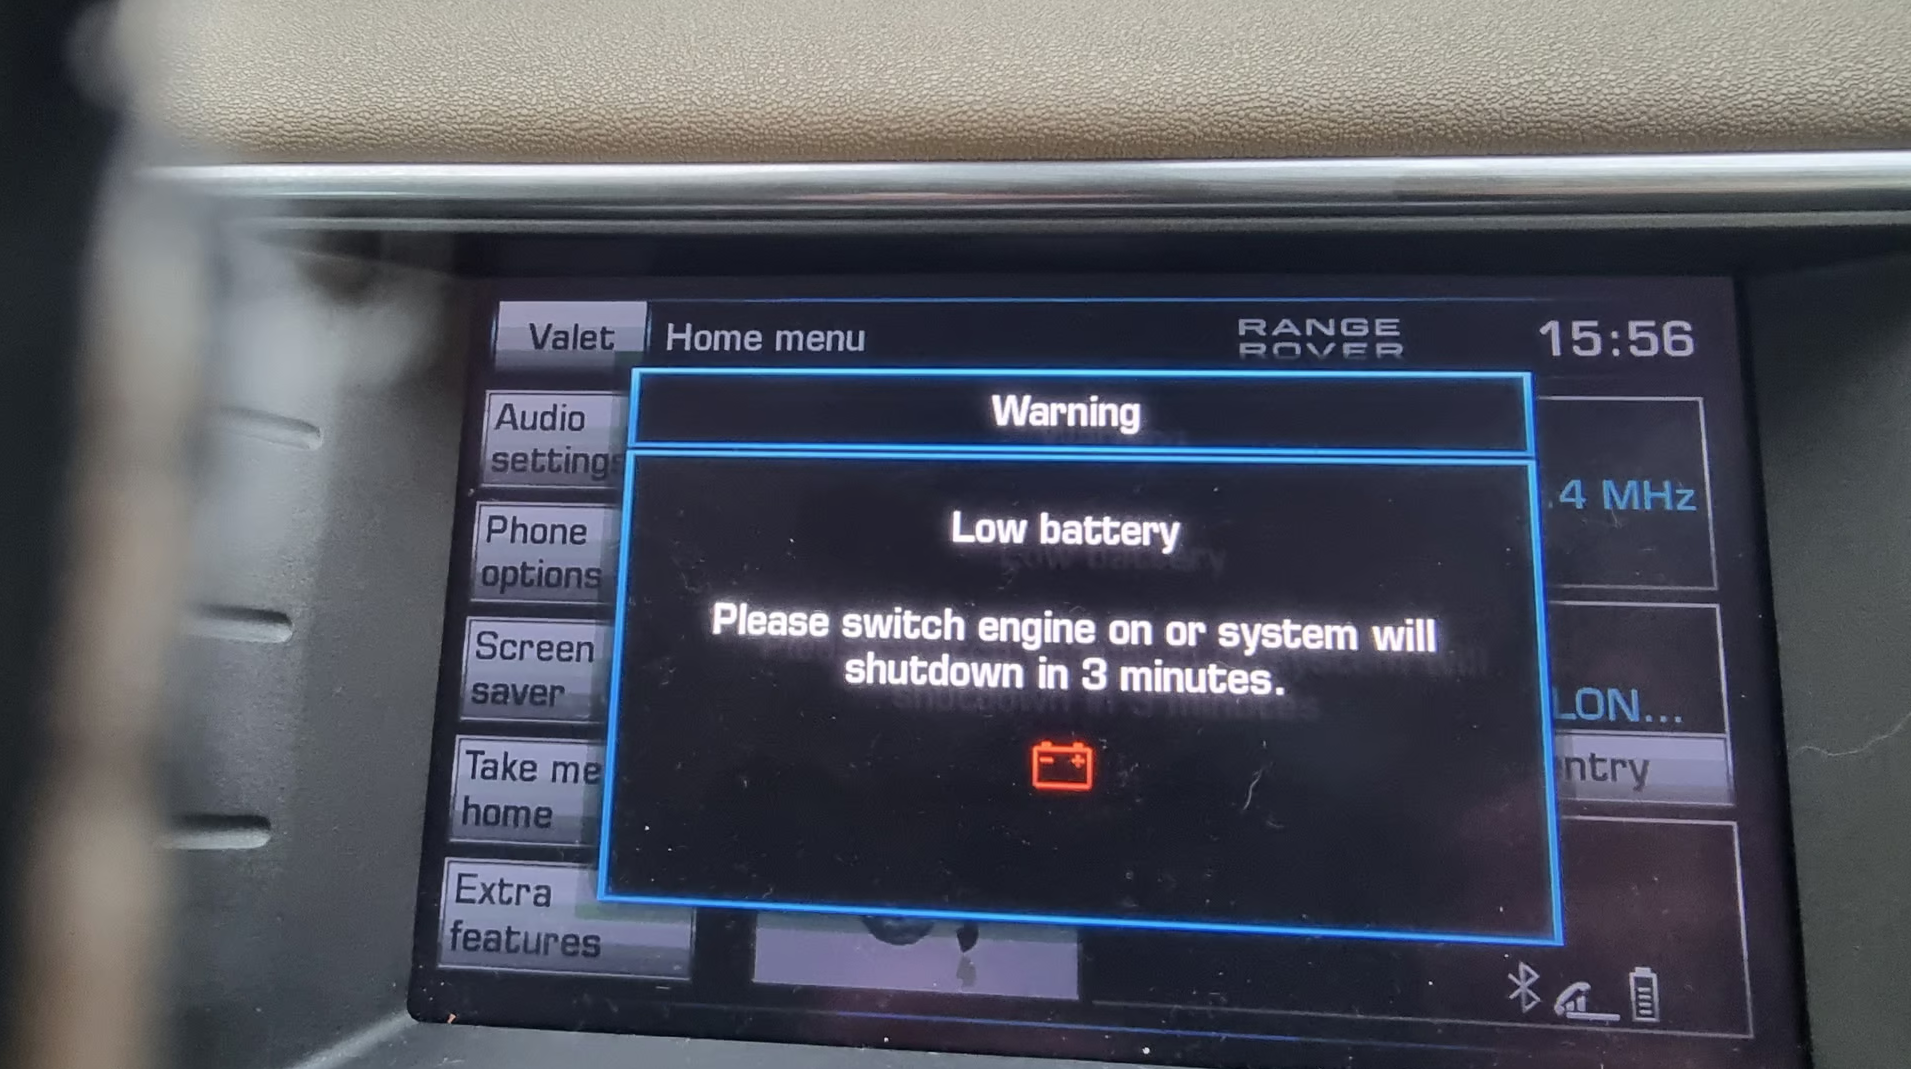 Range Rover keeps saying low battery